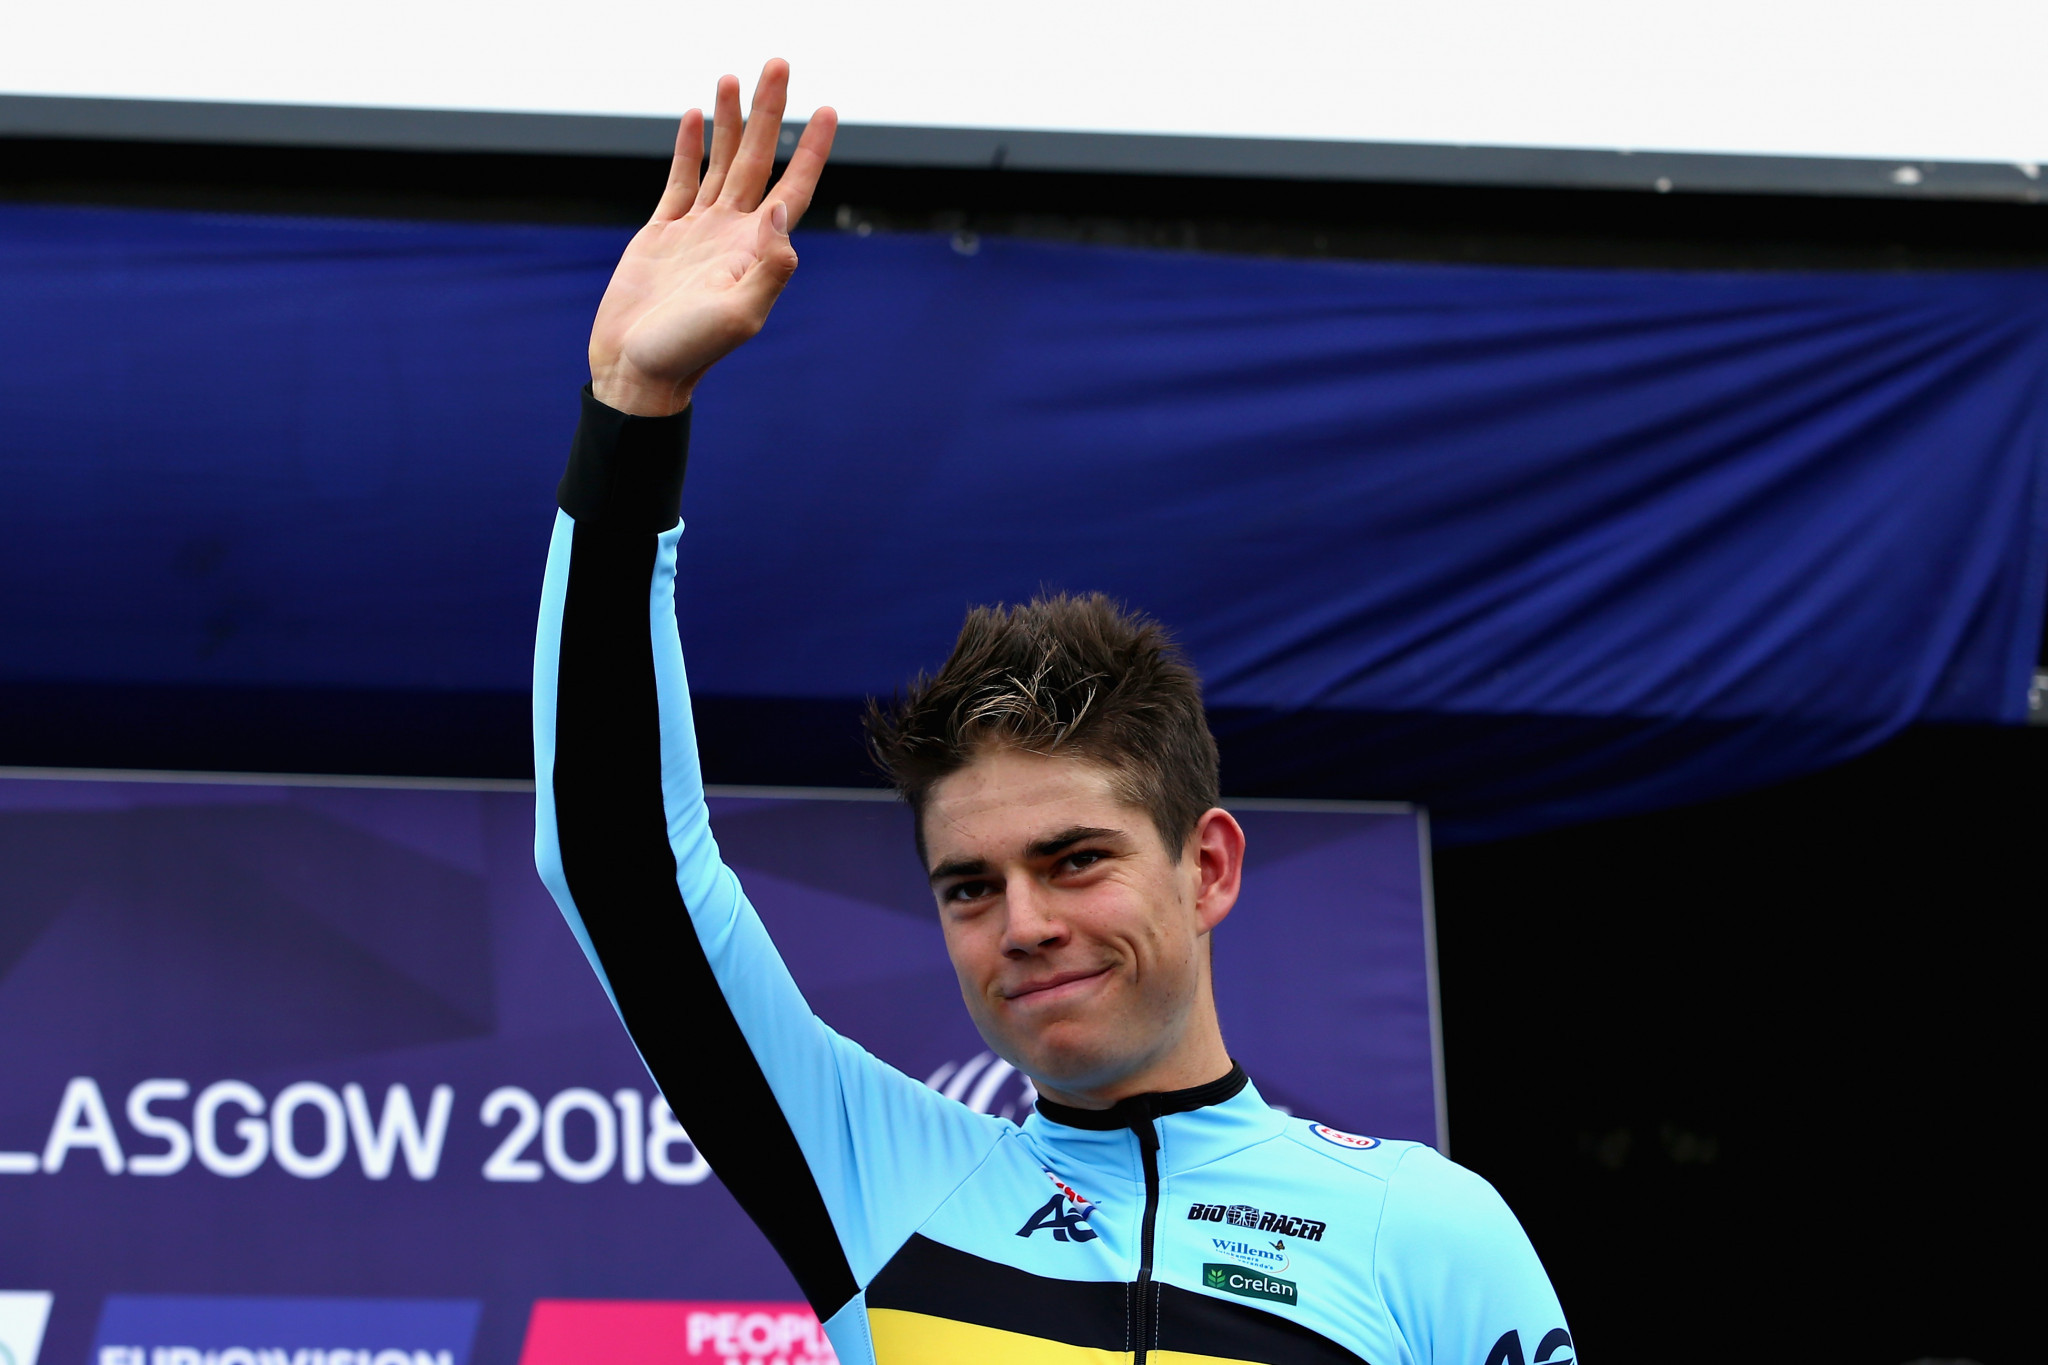 World champion Belgian cyclist Wout van Aert will compete in the Cyclo-Cross European Championships in the Dutch city of s-Hertogenbosch ©Getty Images